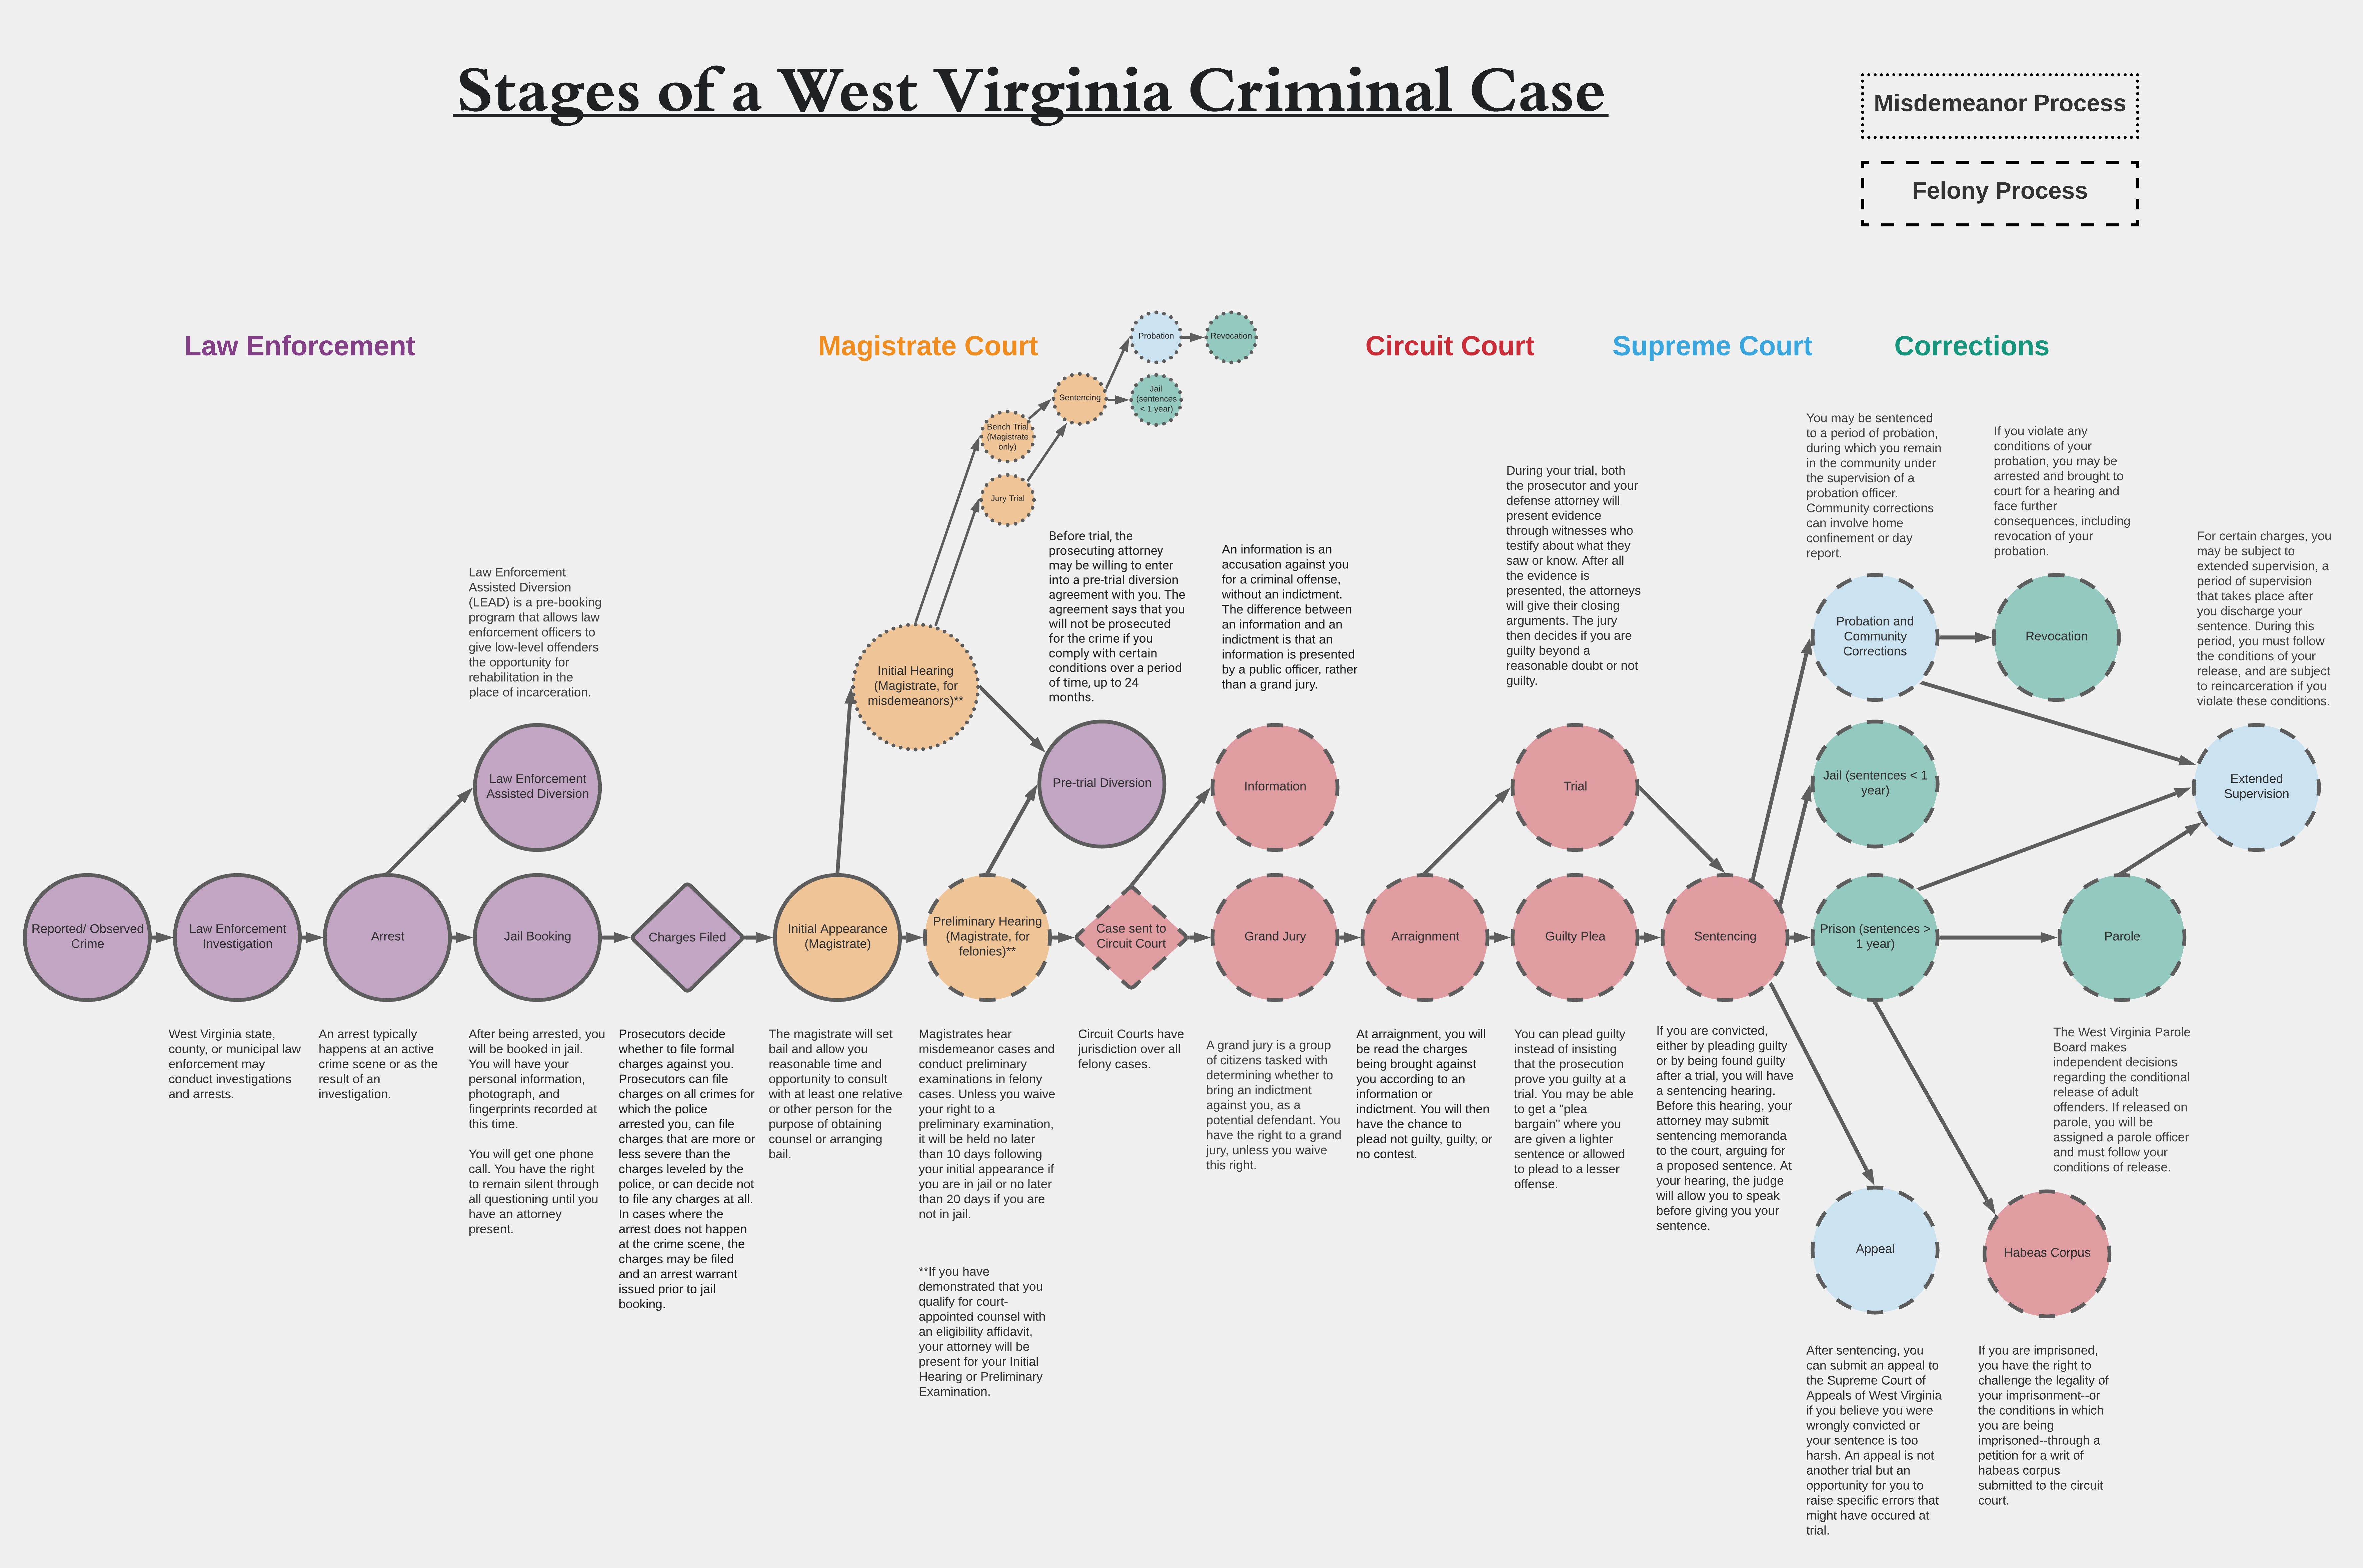 Stages of a West Virginia Criminal Case flow chart - pdf version coming soon